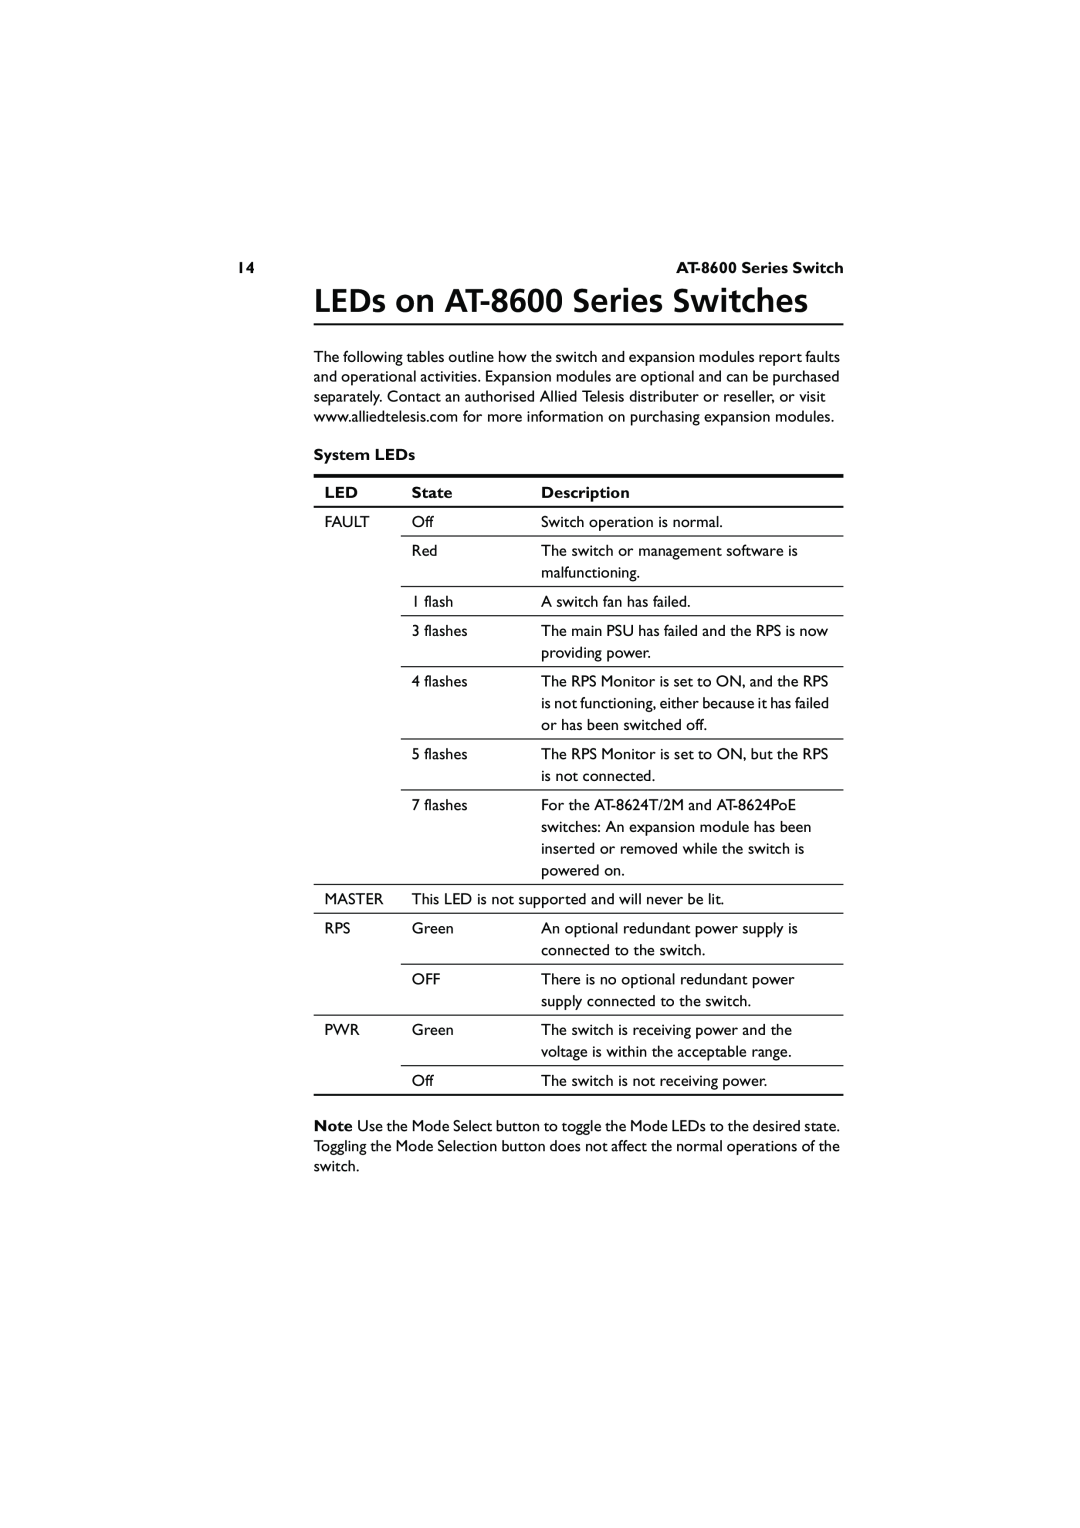 Allied Telesis AT-8624POE, 8624T/2M, 8648T/2SP manual System LEDs, State, Description, LEDs on AT-8600 Series Switches 